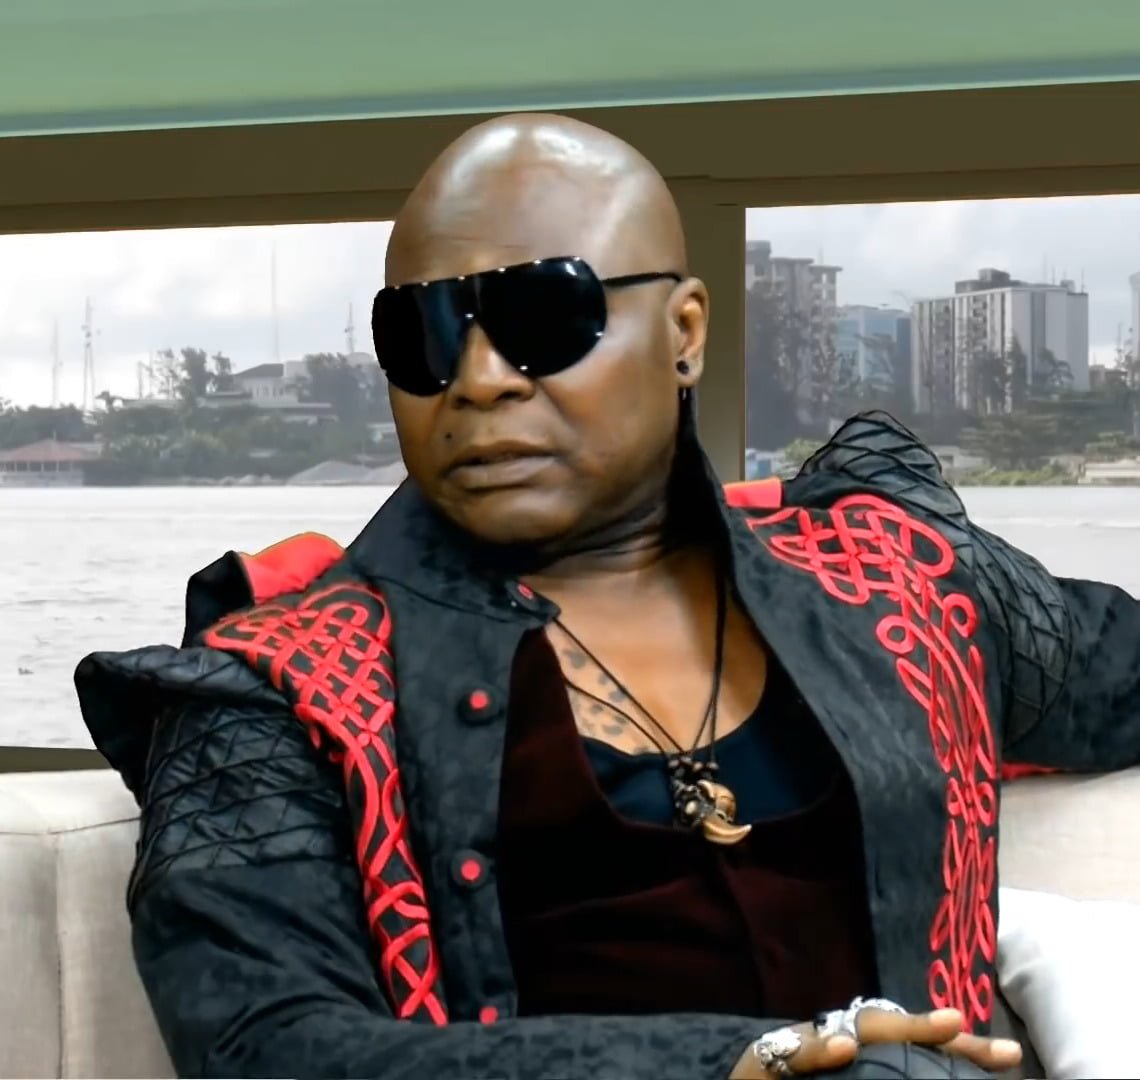 May he burn in hell - Charly Boy's reaction to Simon Ekpa's arrest